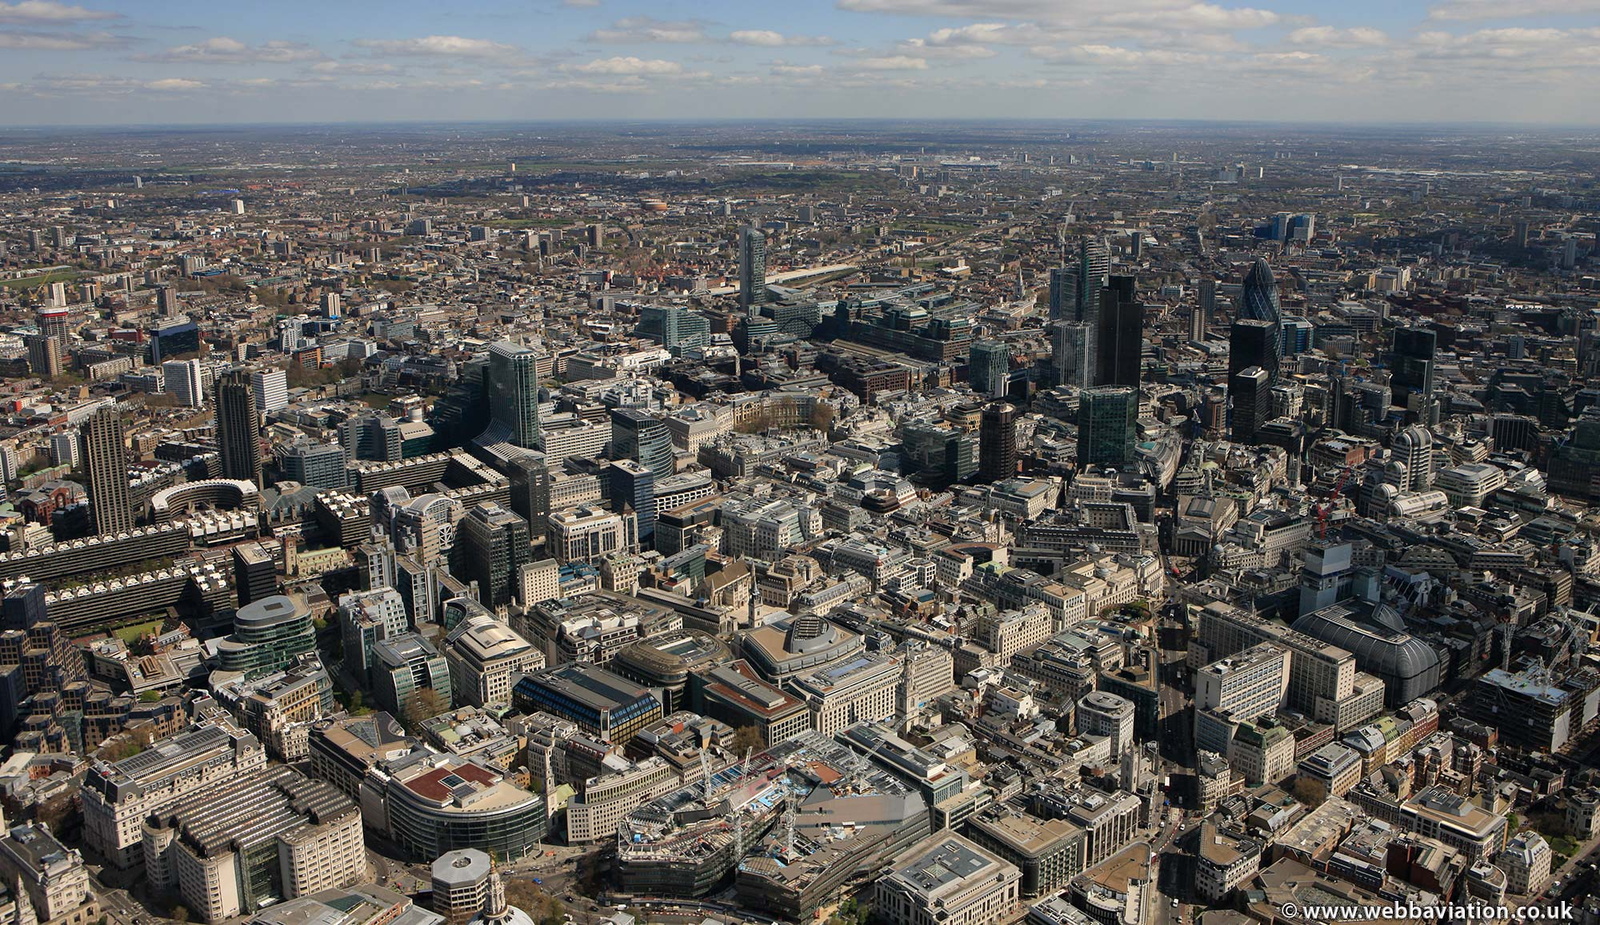 London Financial District with Cheapside  in the foregroundfrom the air